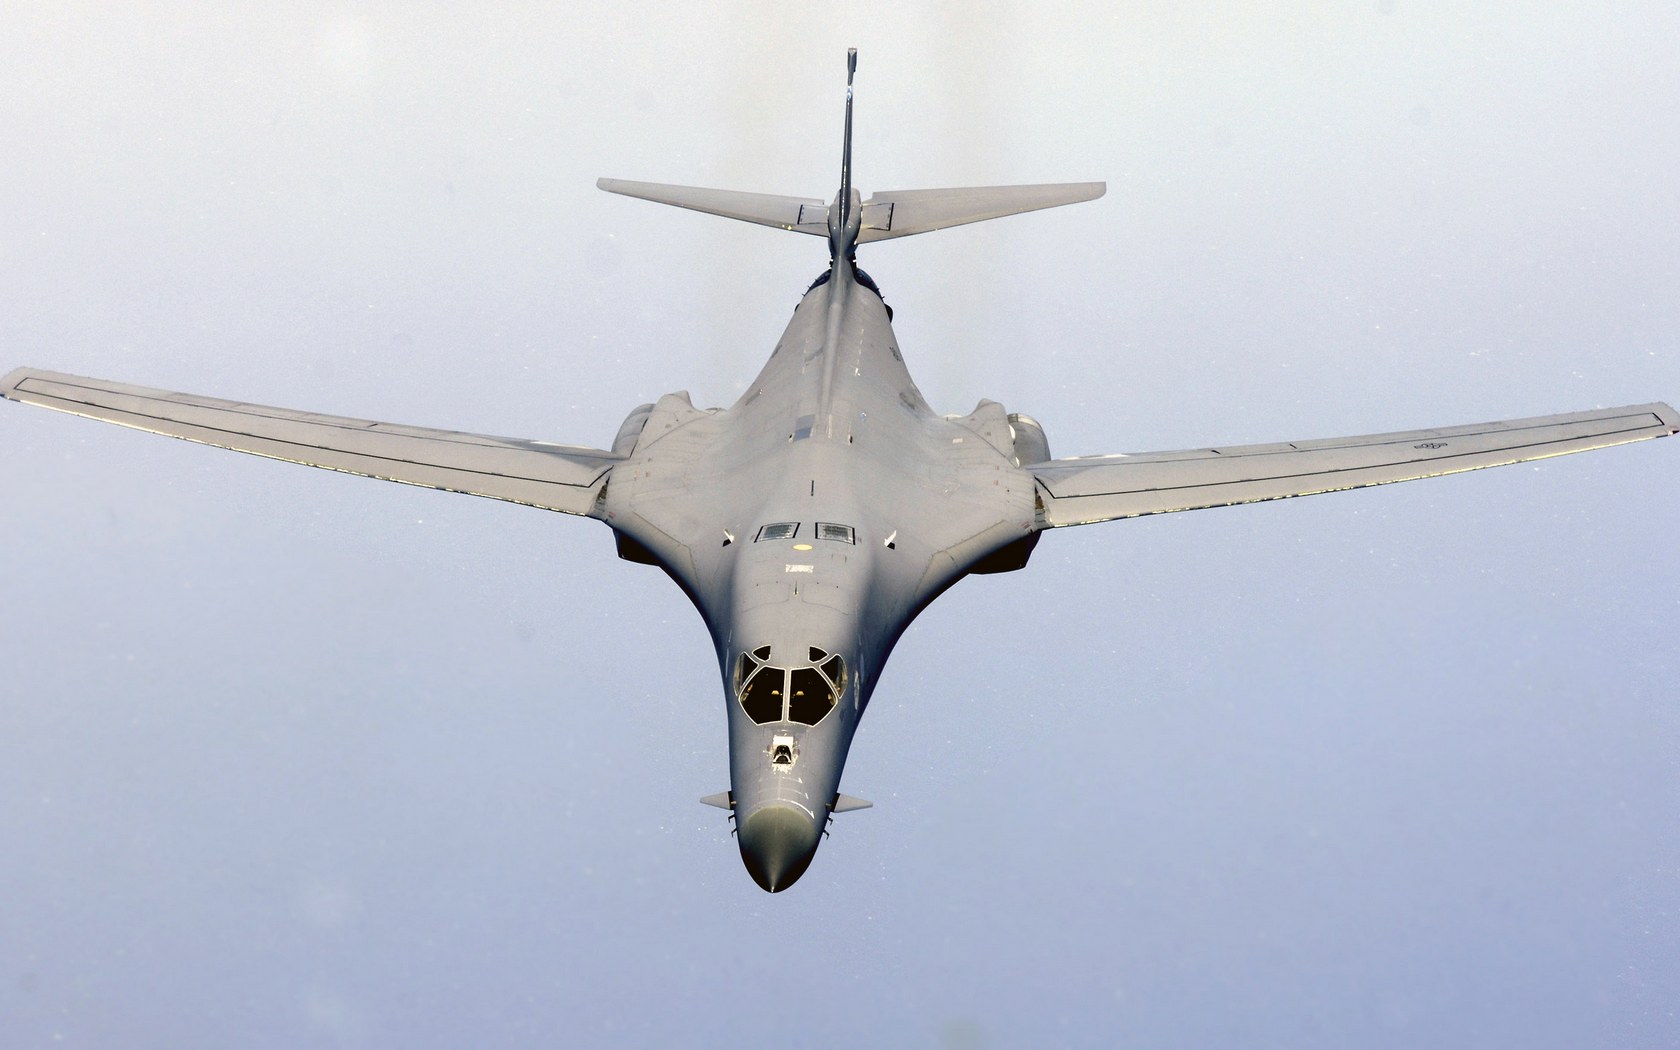 Download full size B-1B Lancer Military Airplanes wallpaper / 1680x1050